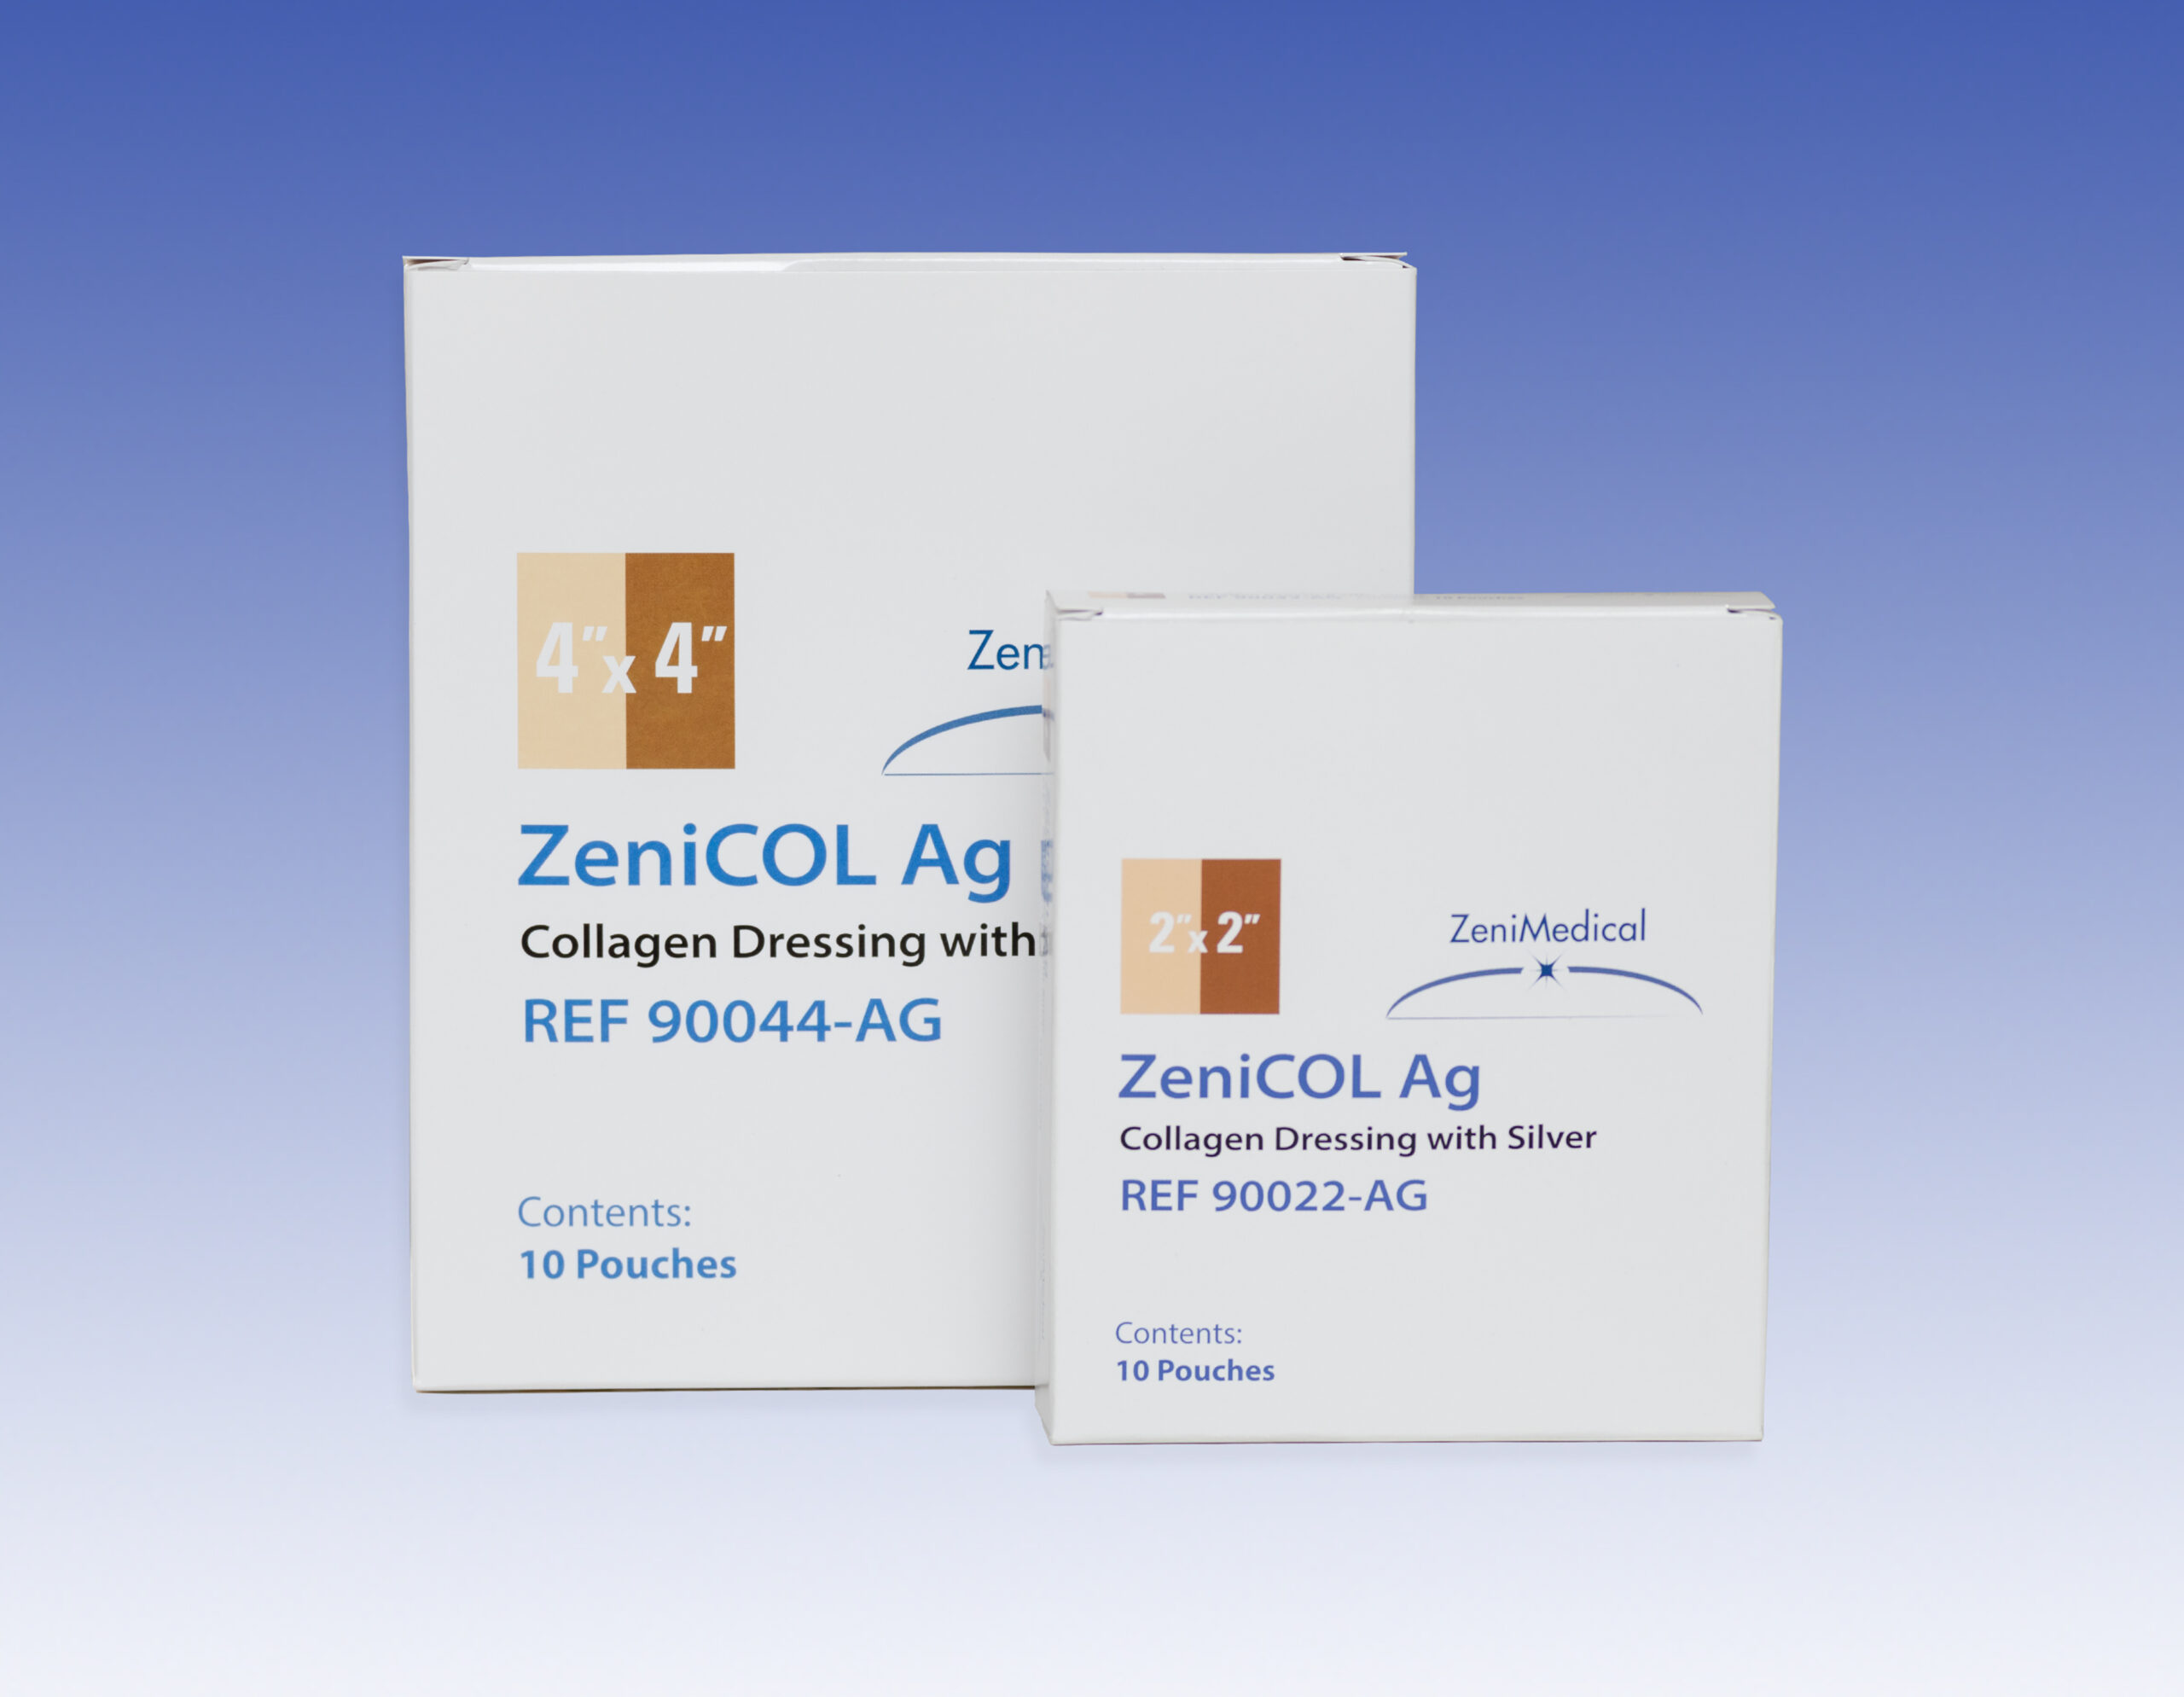 ZeniCOL Ag Silver Collagen Dressing Product Packaging Photo